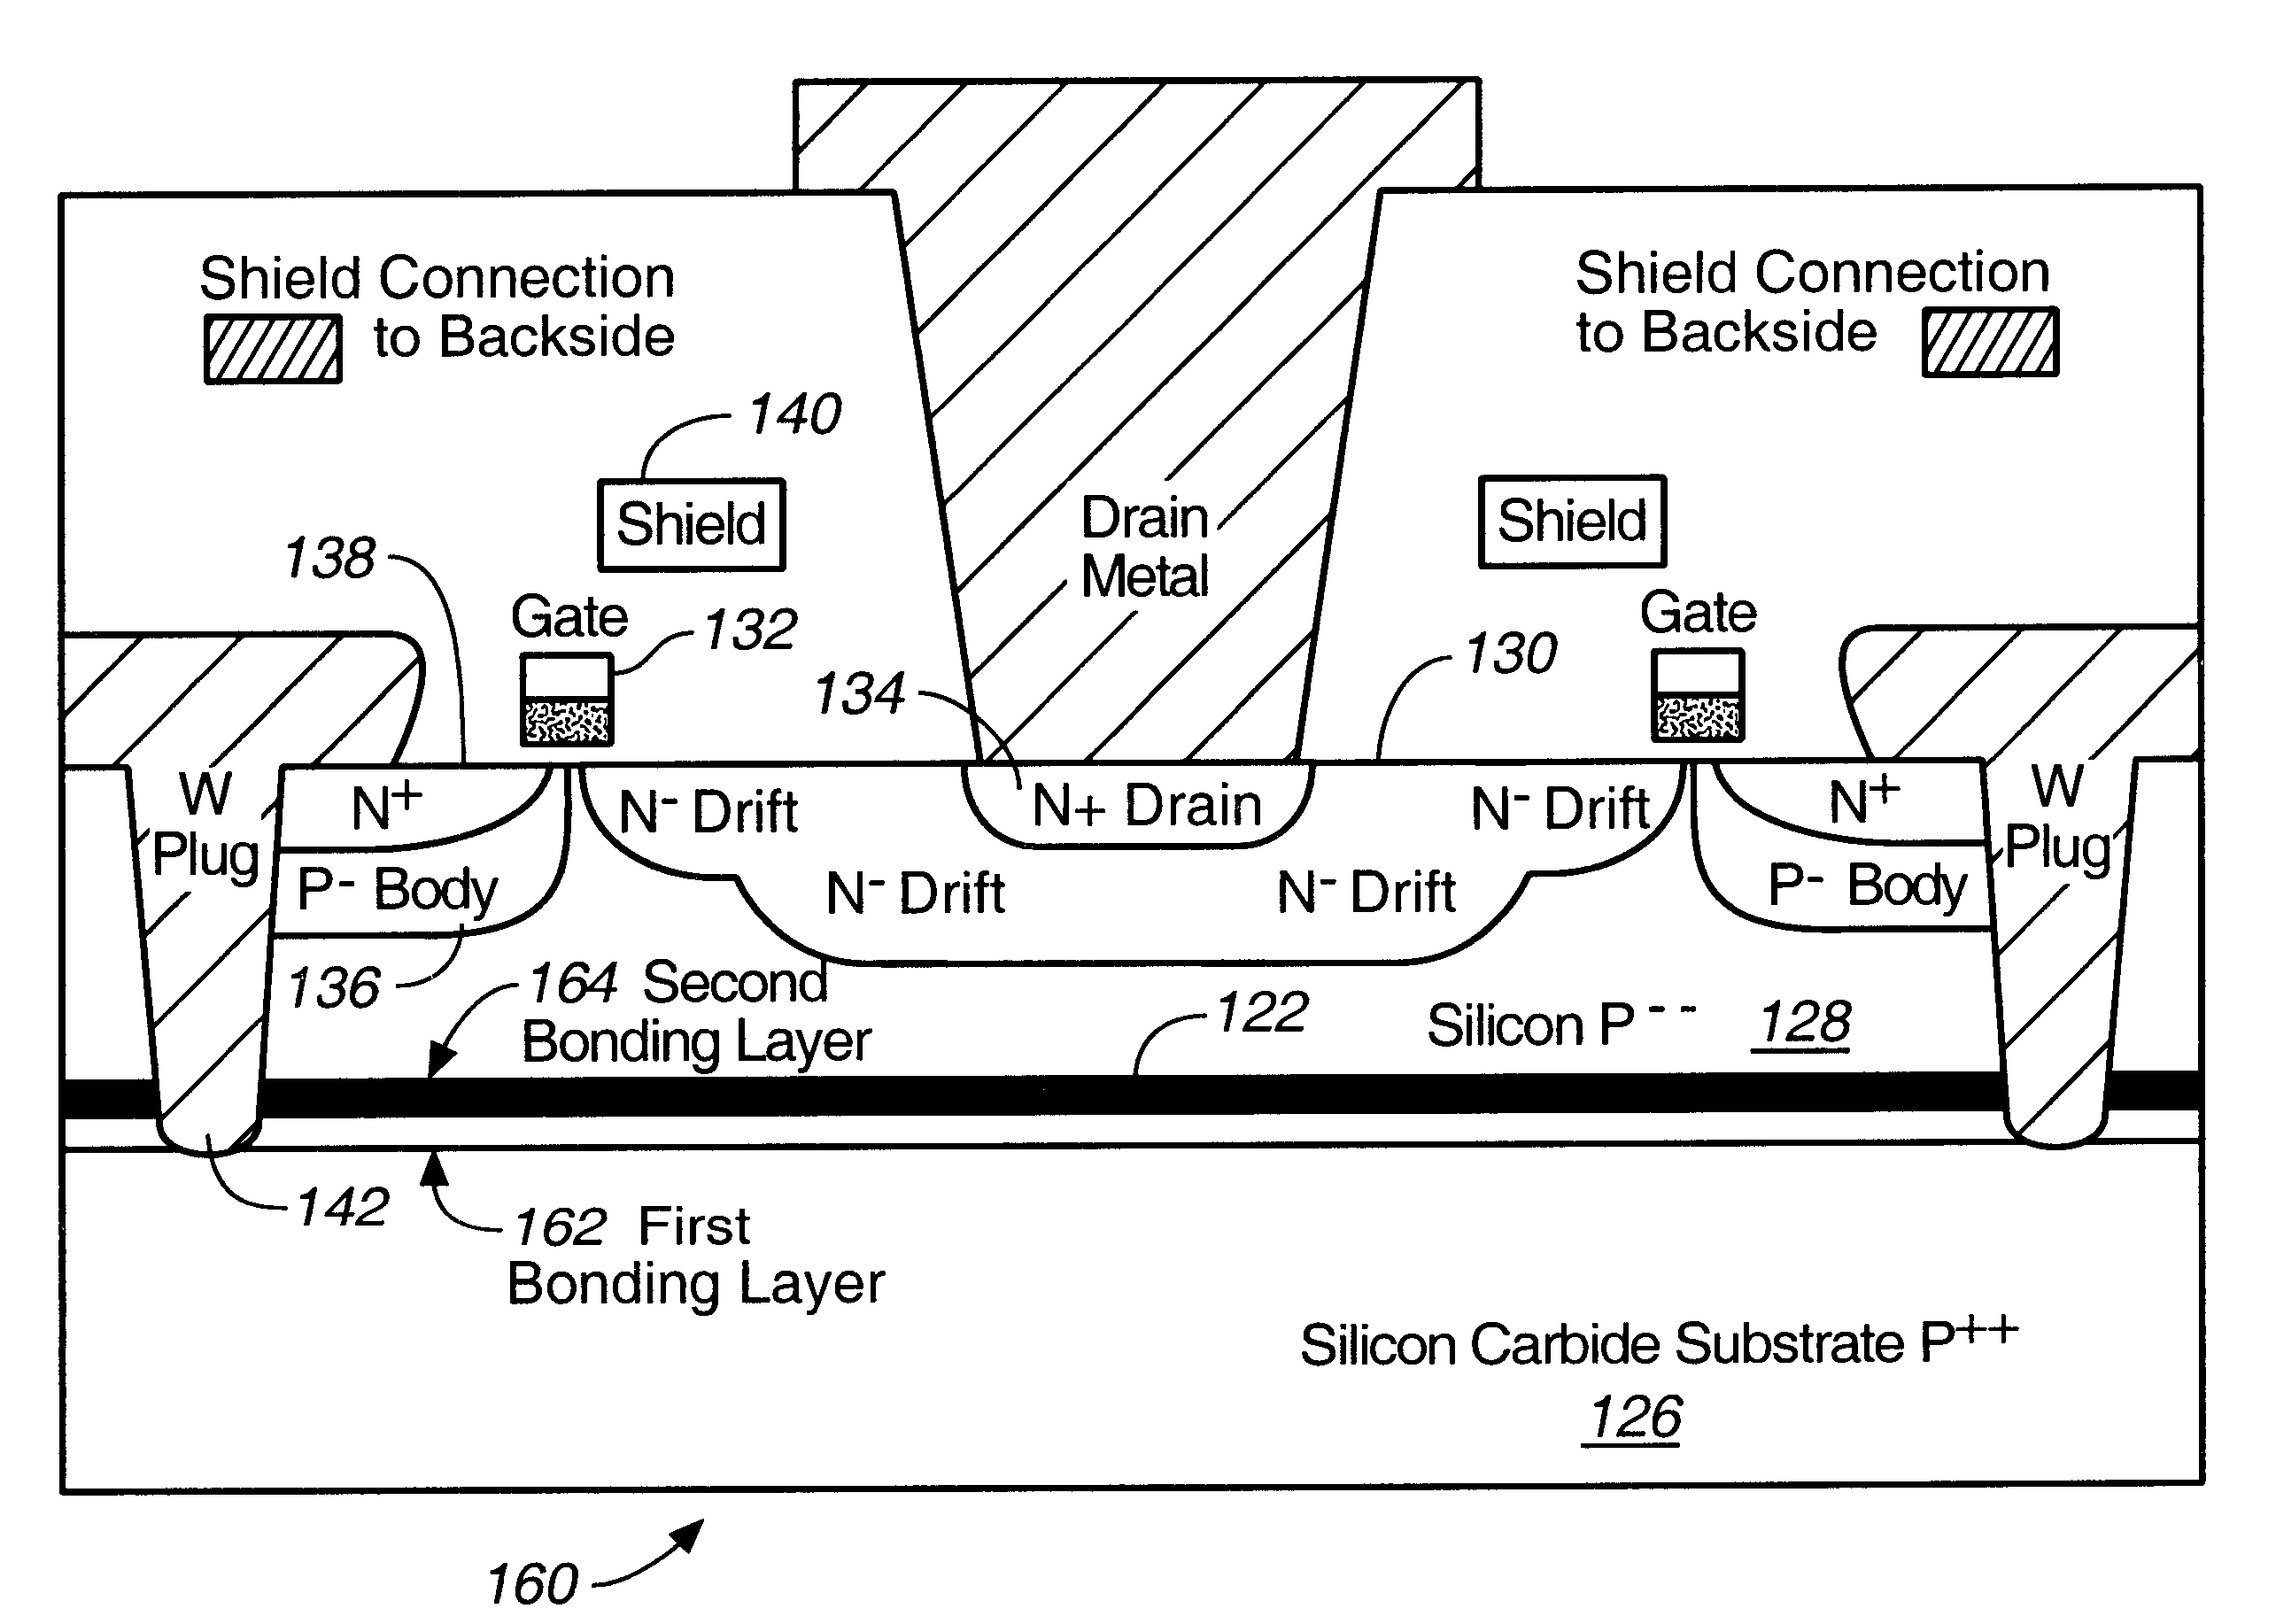 Microwave field effect transistor structure on silicon carbide substrate